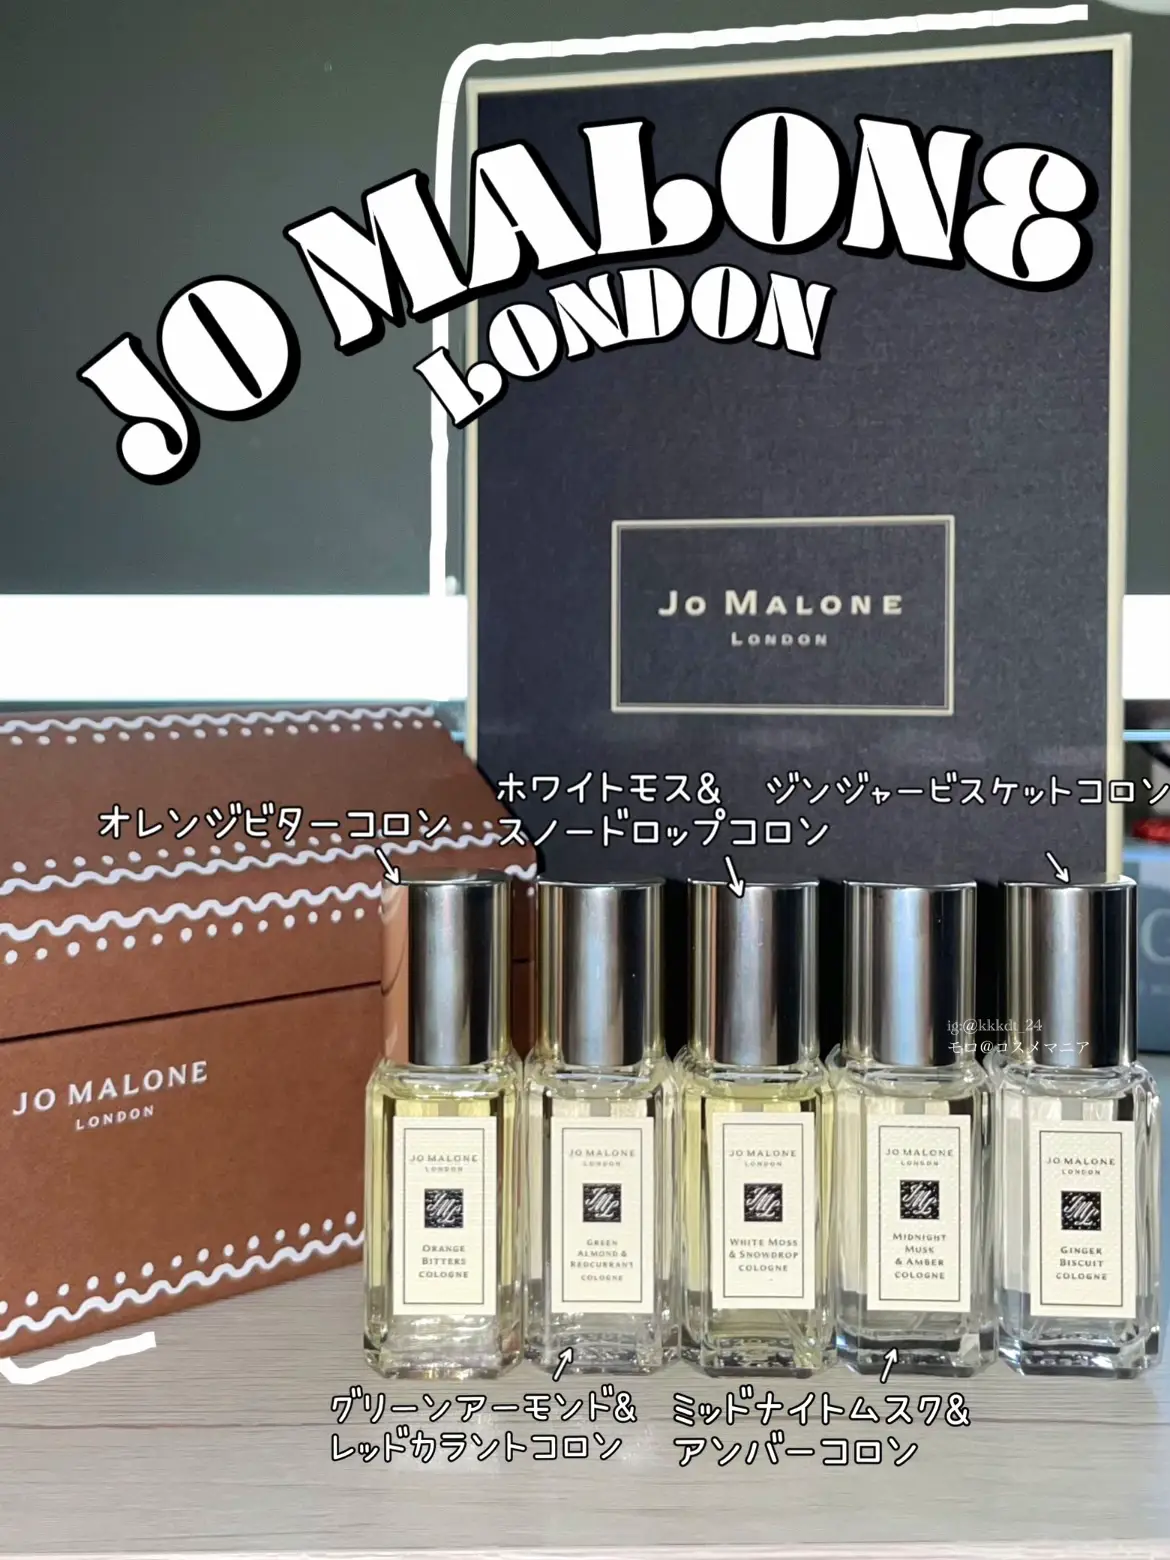 JO MALONE LONDON 】 CHRISTMAS COLON COLLECTION🎄 | Gallery posted